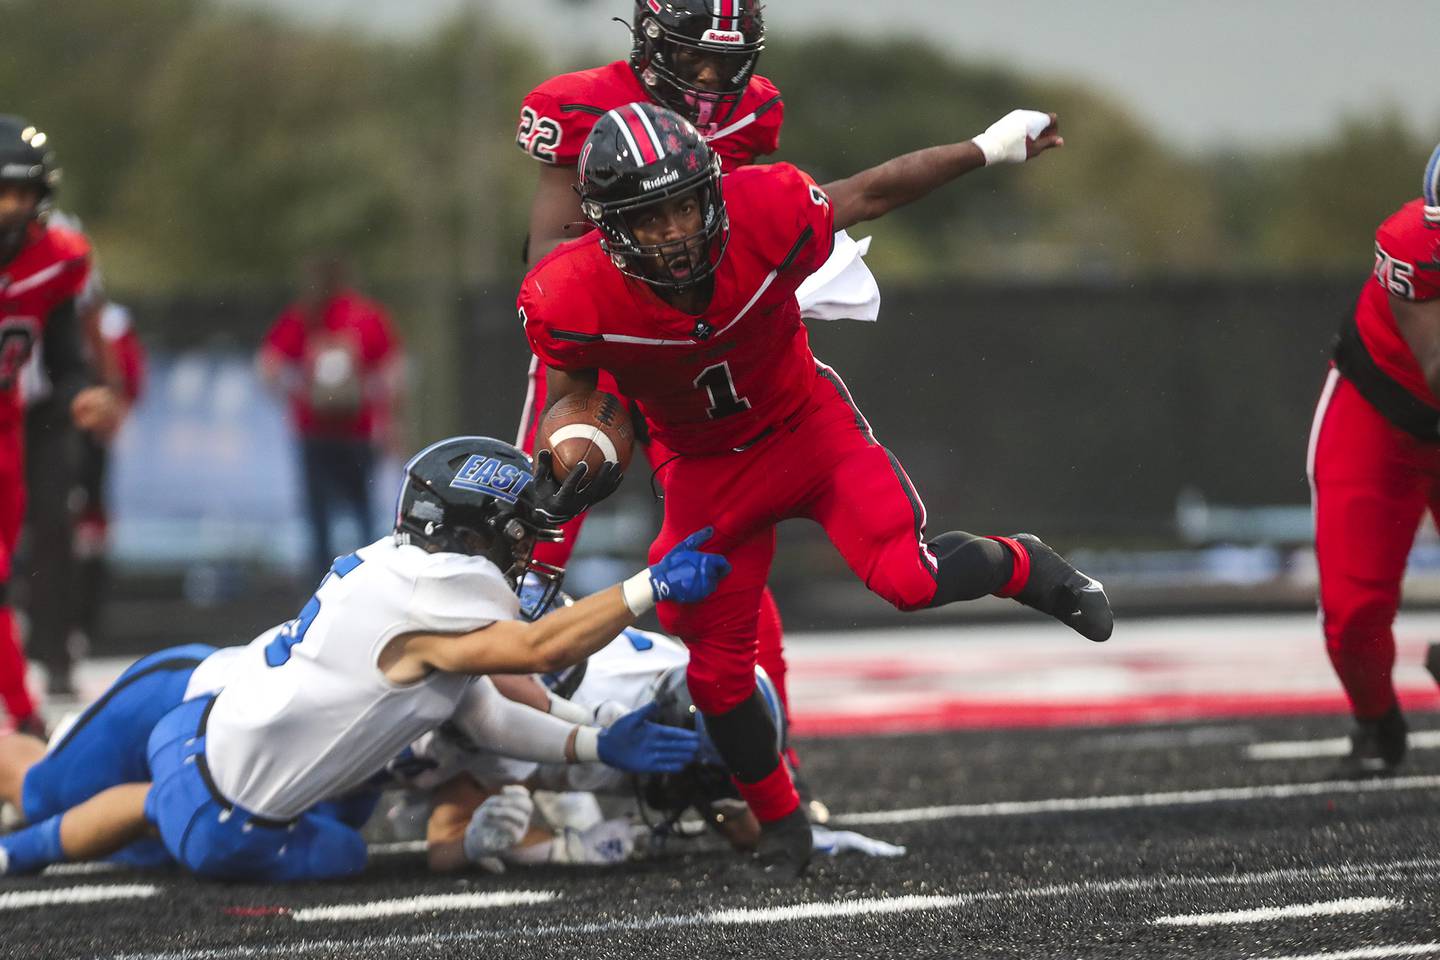 Bolingbrook running back Jaquan Howard springs out of the backfield on Friday, Sept. 24, 2021, at Bolingbrook High School in Bolingbrook, Ill.